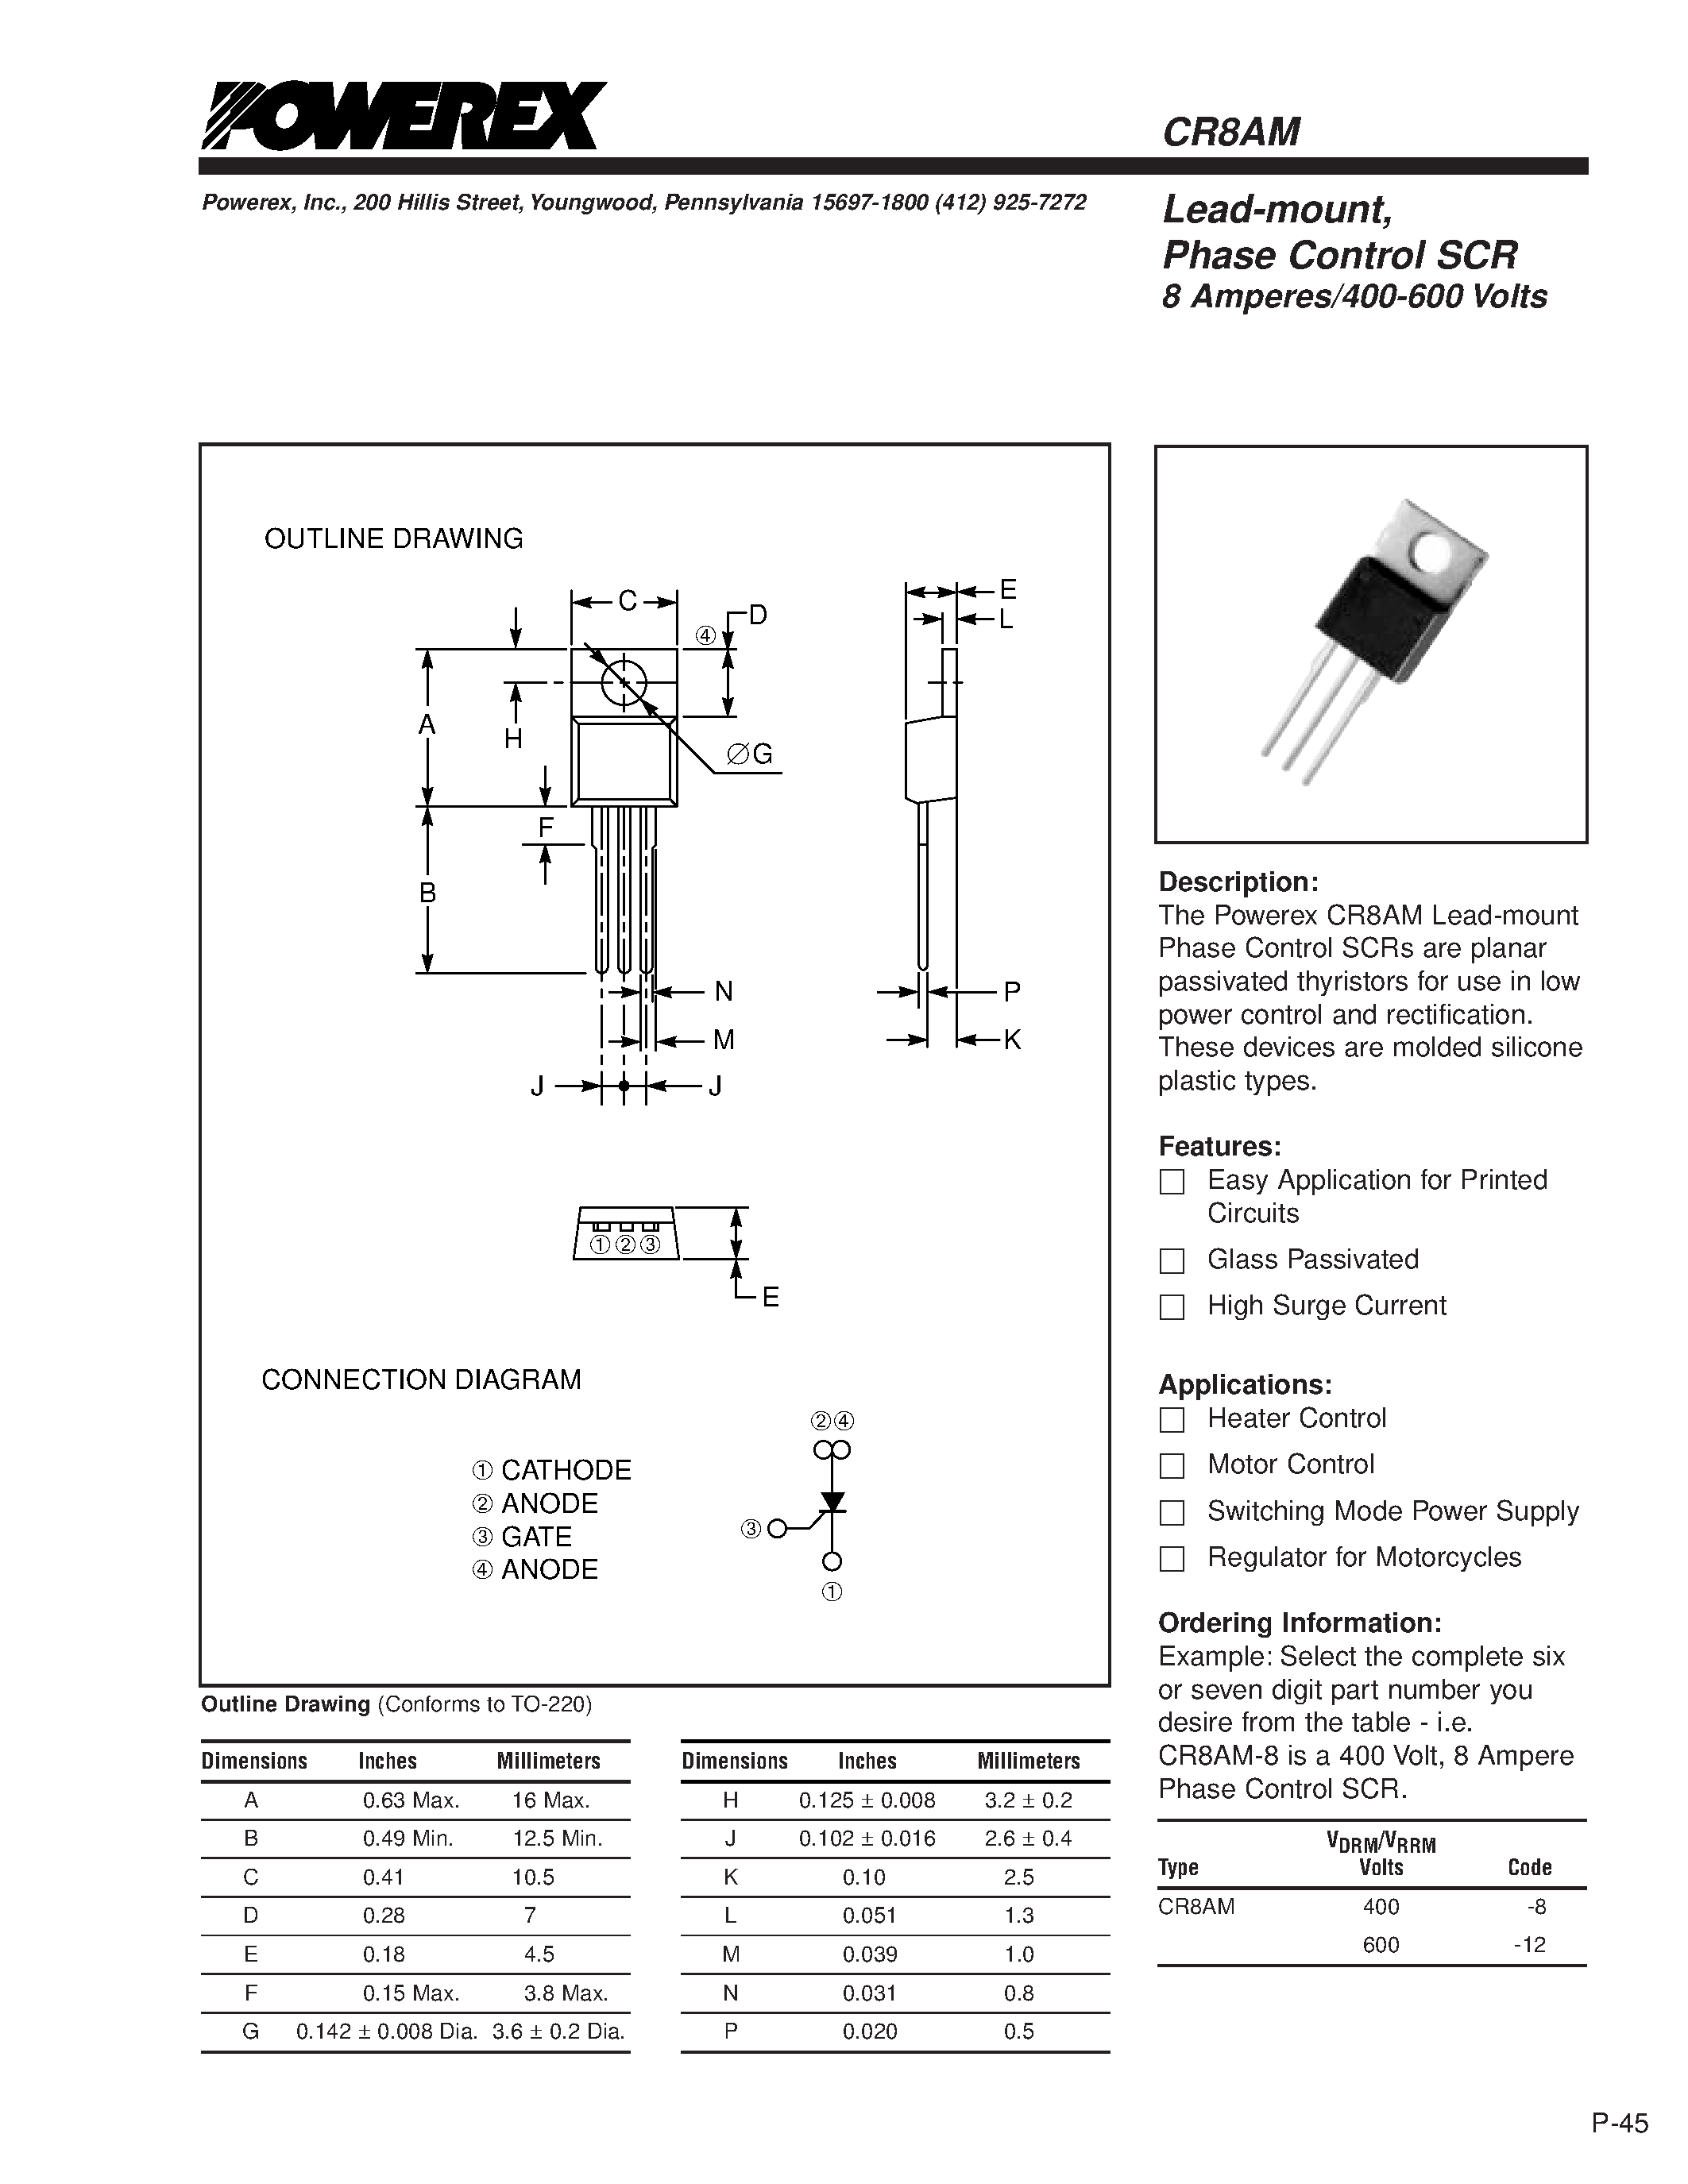 Datasheet CR8AM400-8 - Lead-mount/ Phase Control SCR 8 Amperes/400-600 Volts page 1